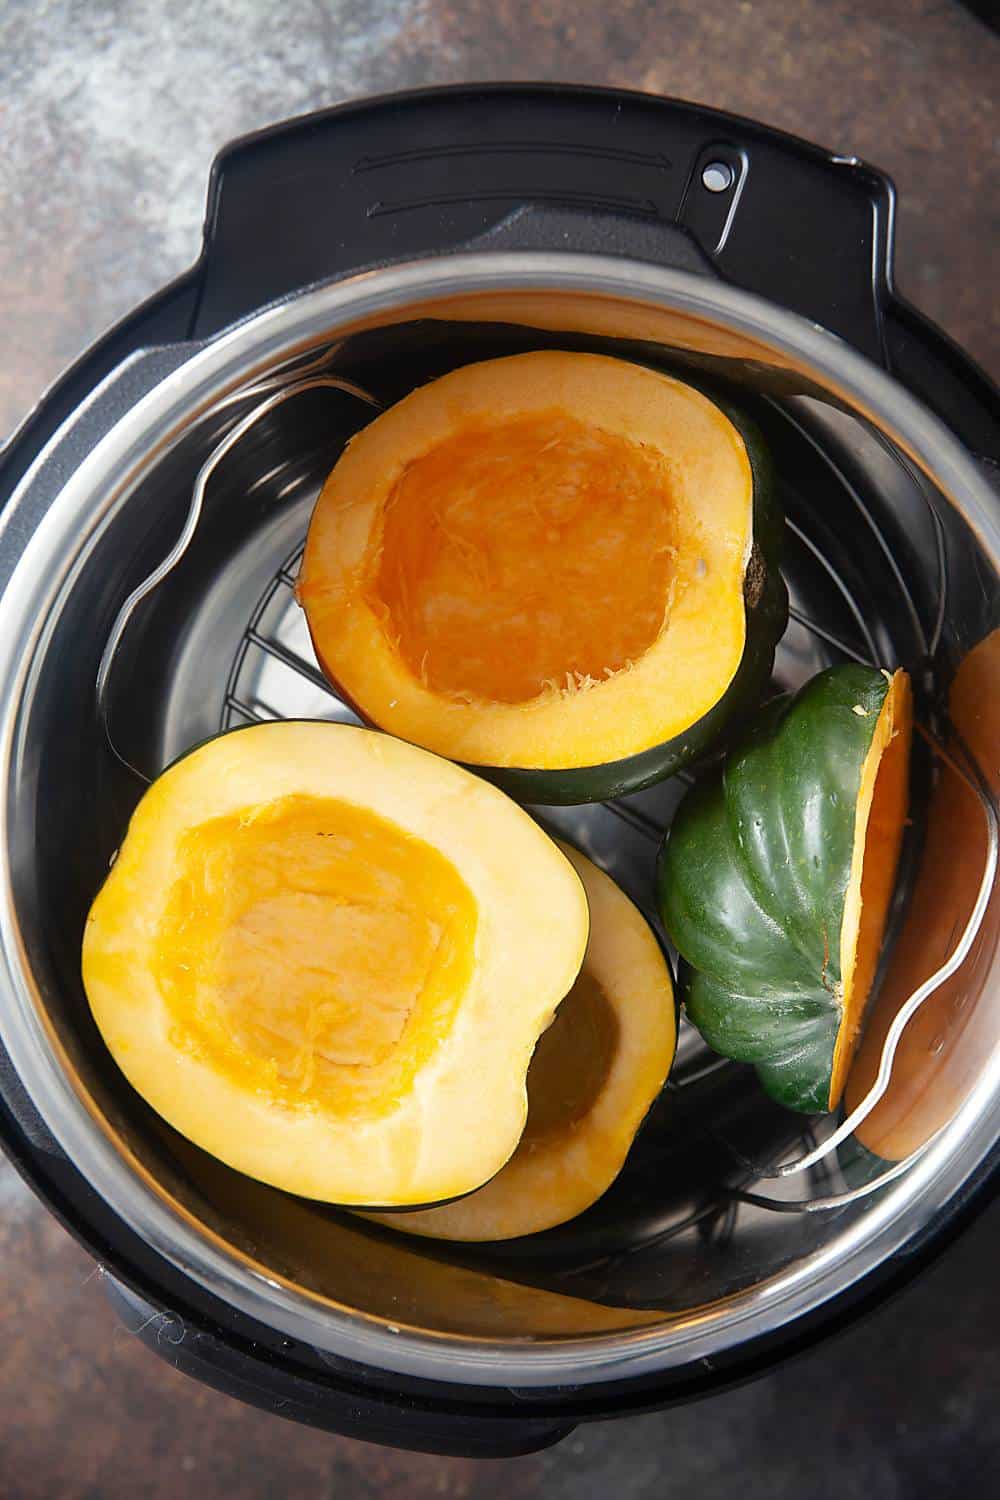 Cooking acorn squash in an Instant Pot is so fast!